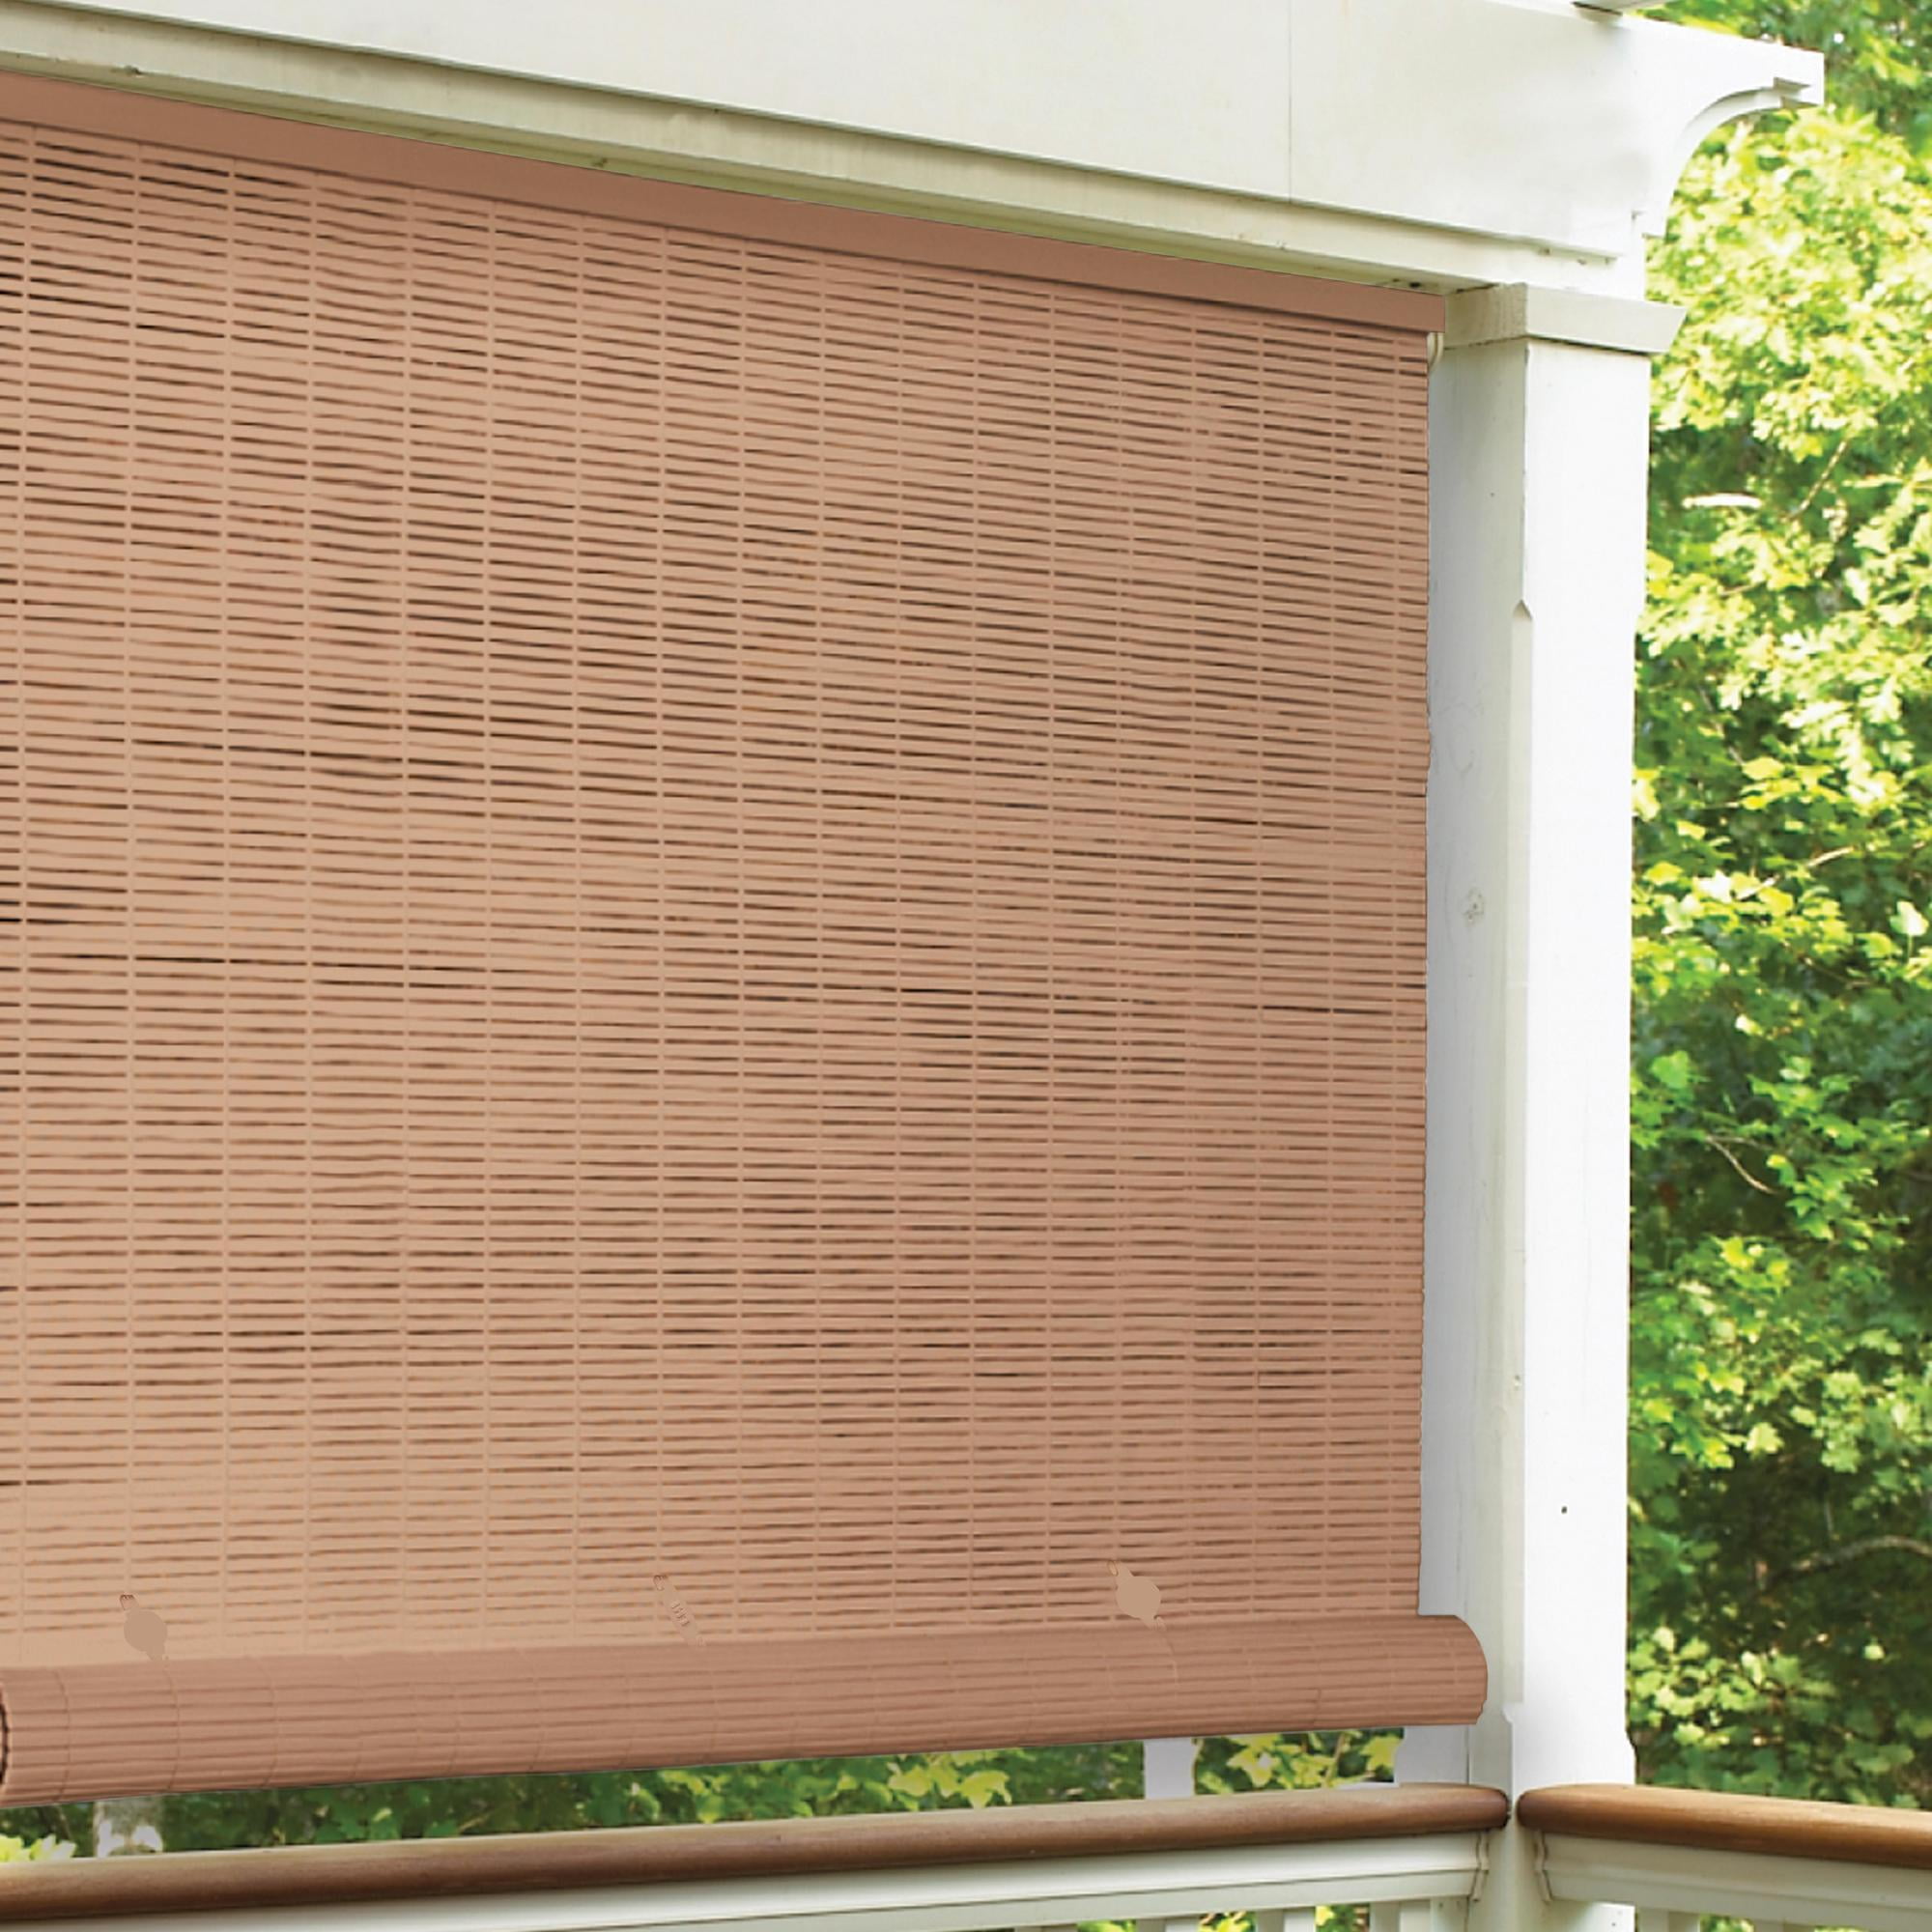 Radiance PVC Roll-up Outdoor Cordless Brown Woodgrain 1/4